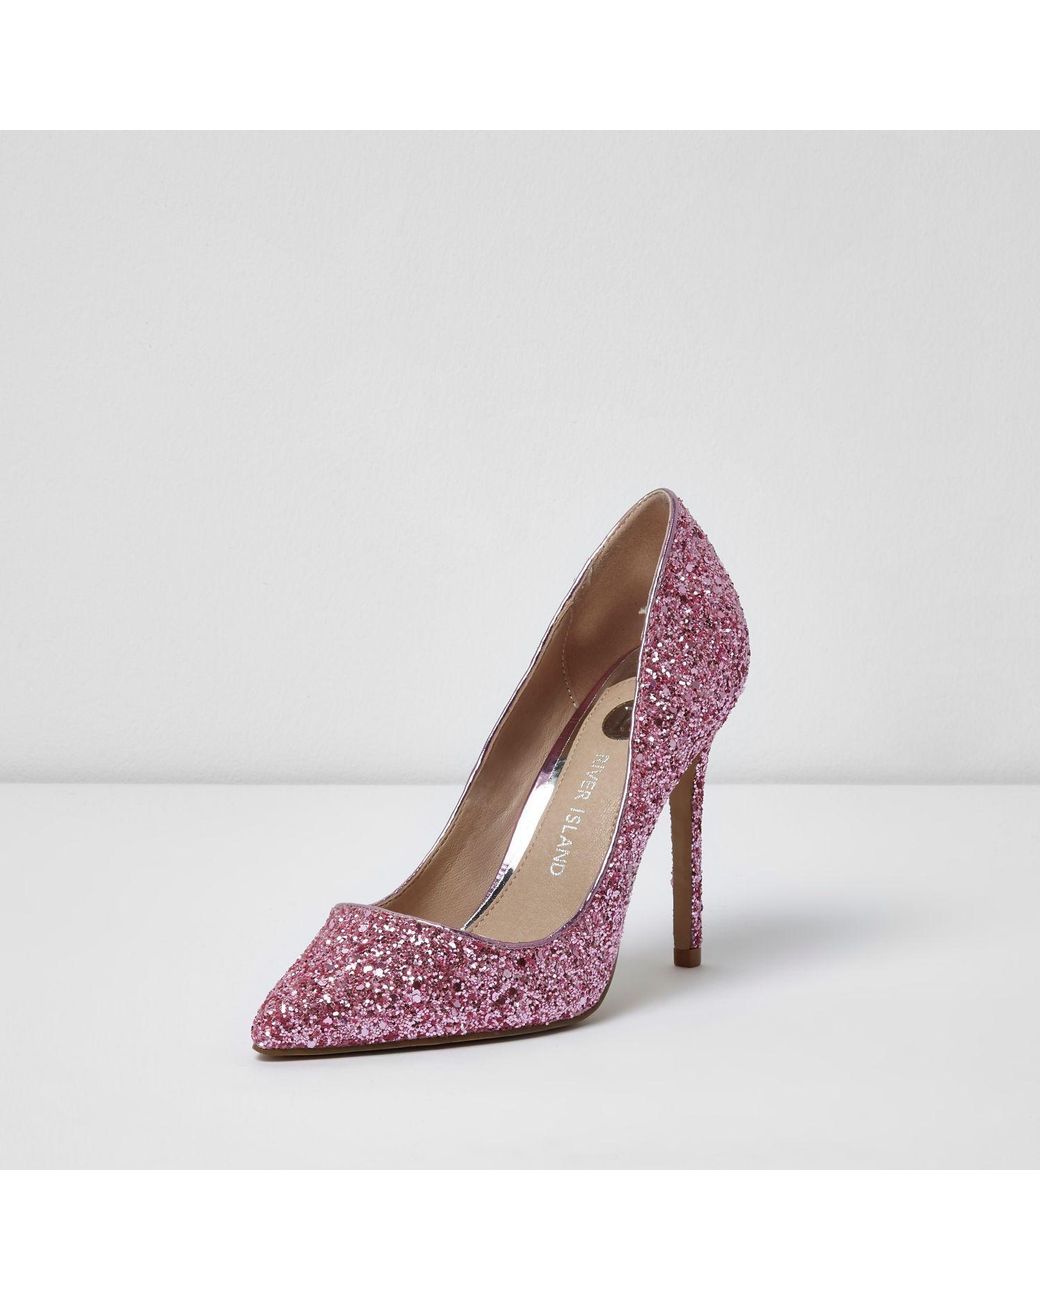 River Island Pink Glitter Court Shoes | Lyst